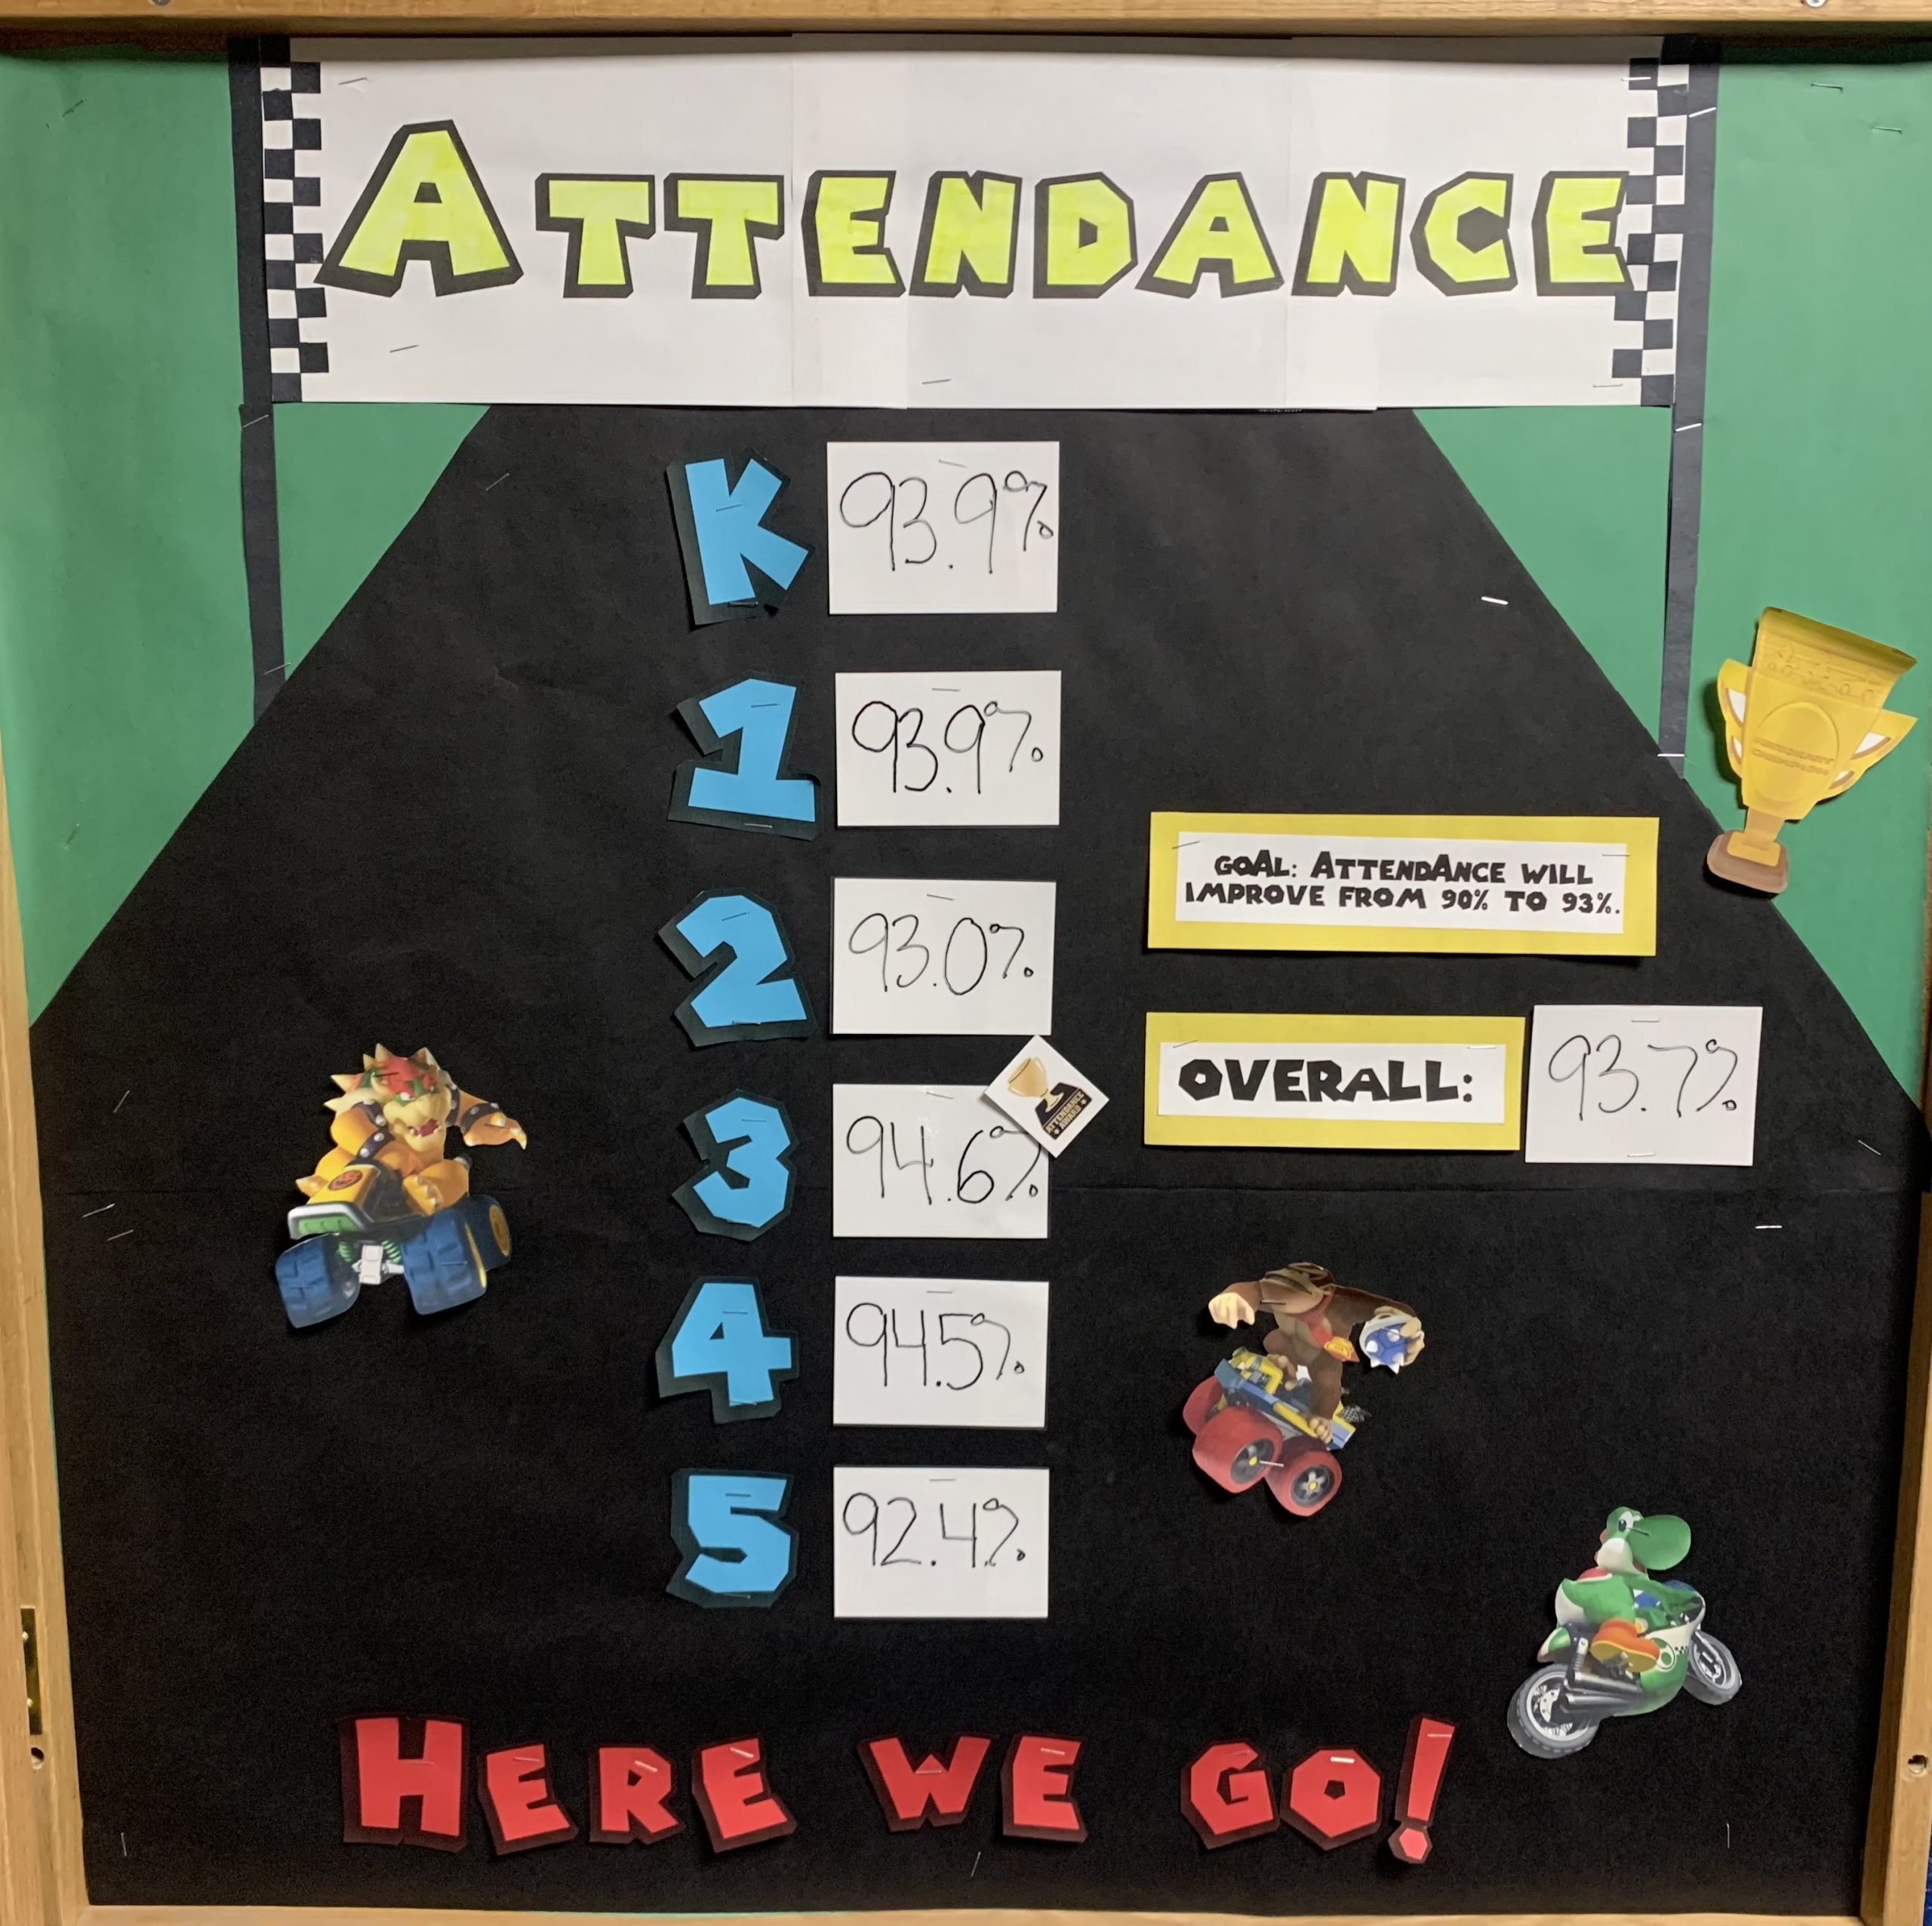 Our September daily attendance was 93.7%! Way to go!